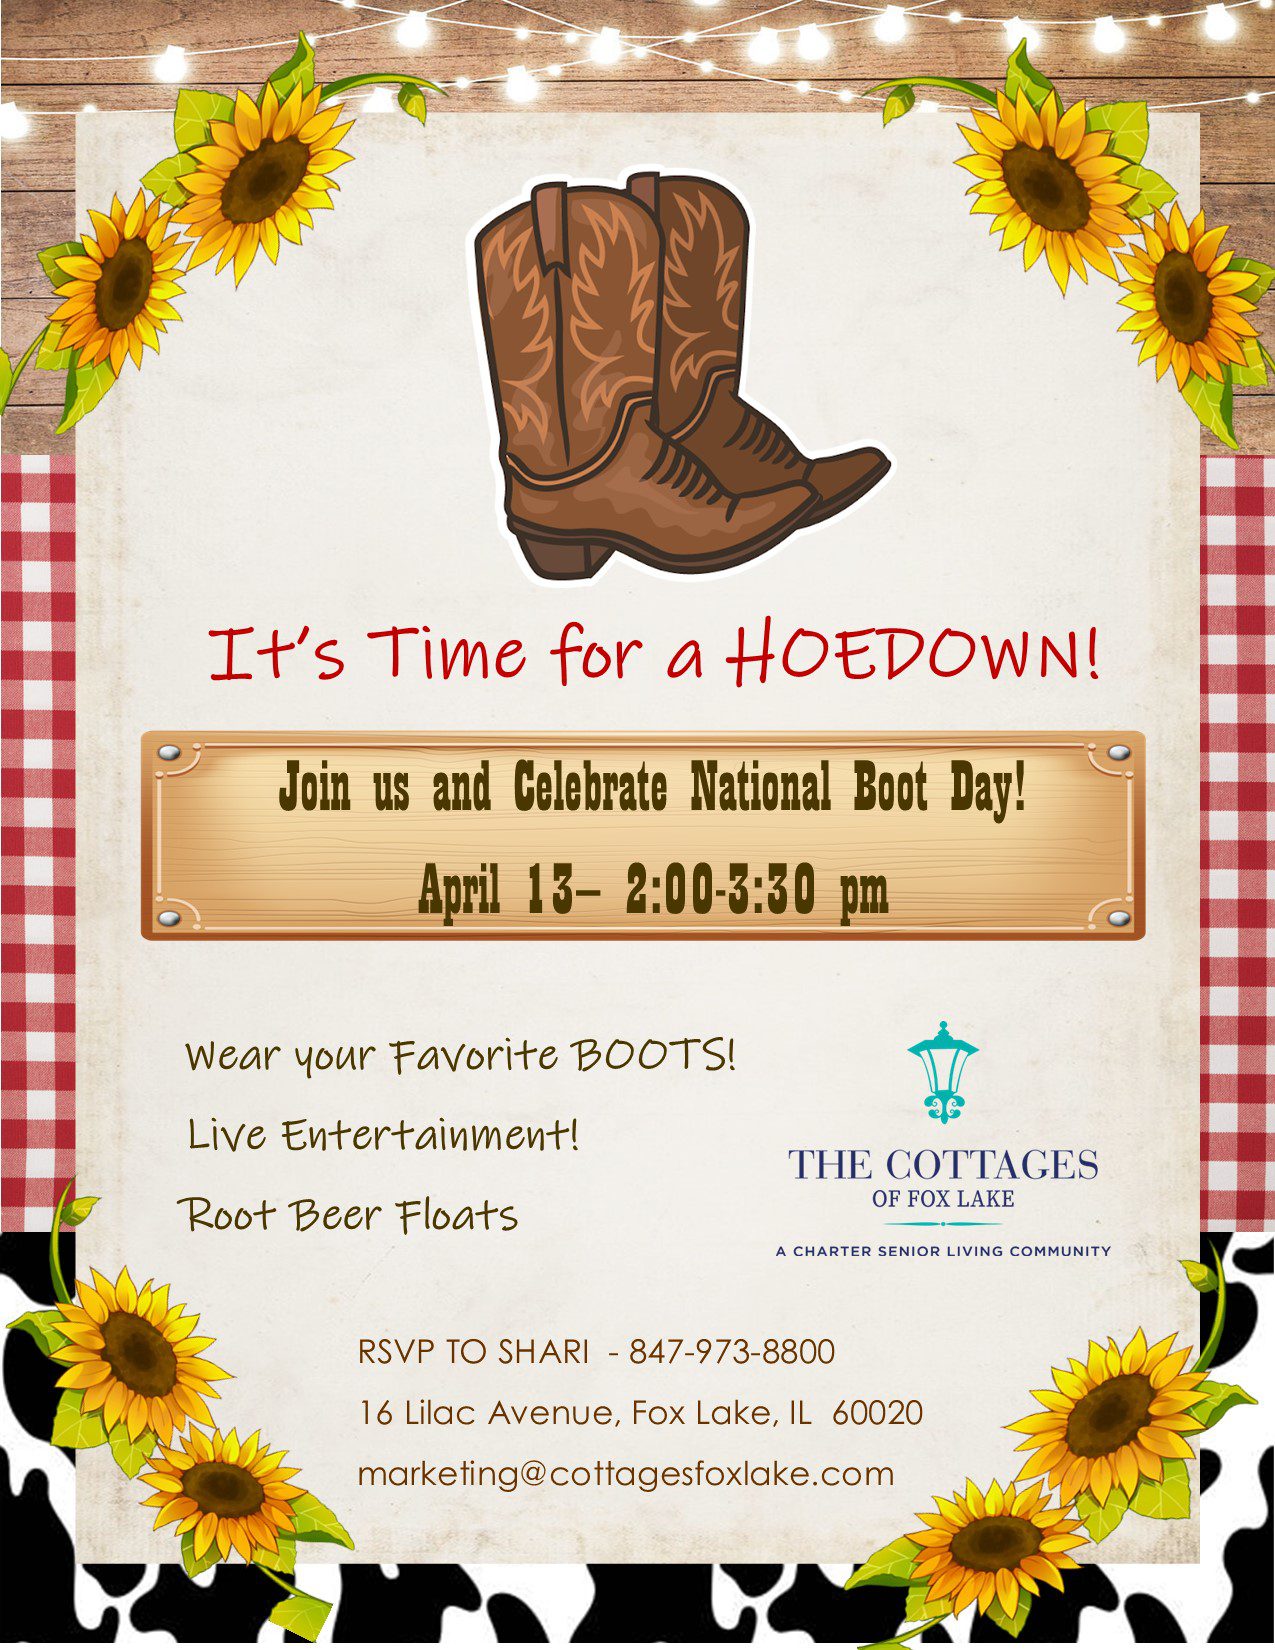 Cottages of Fox Lake - Assisted Living and Memory Care - Hoedown